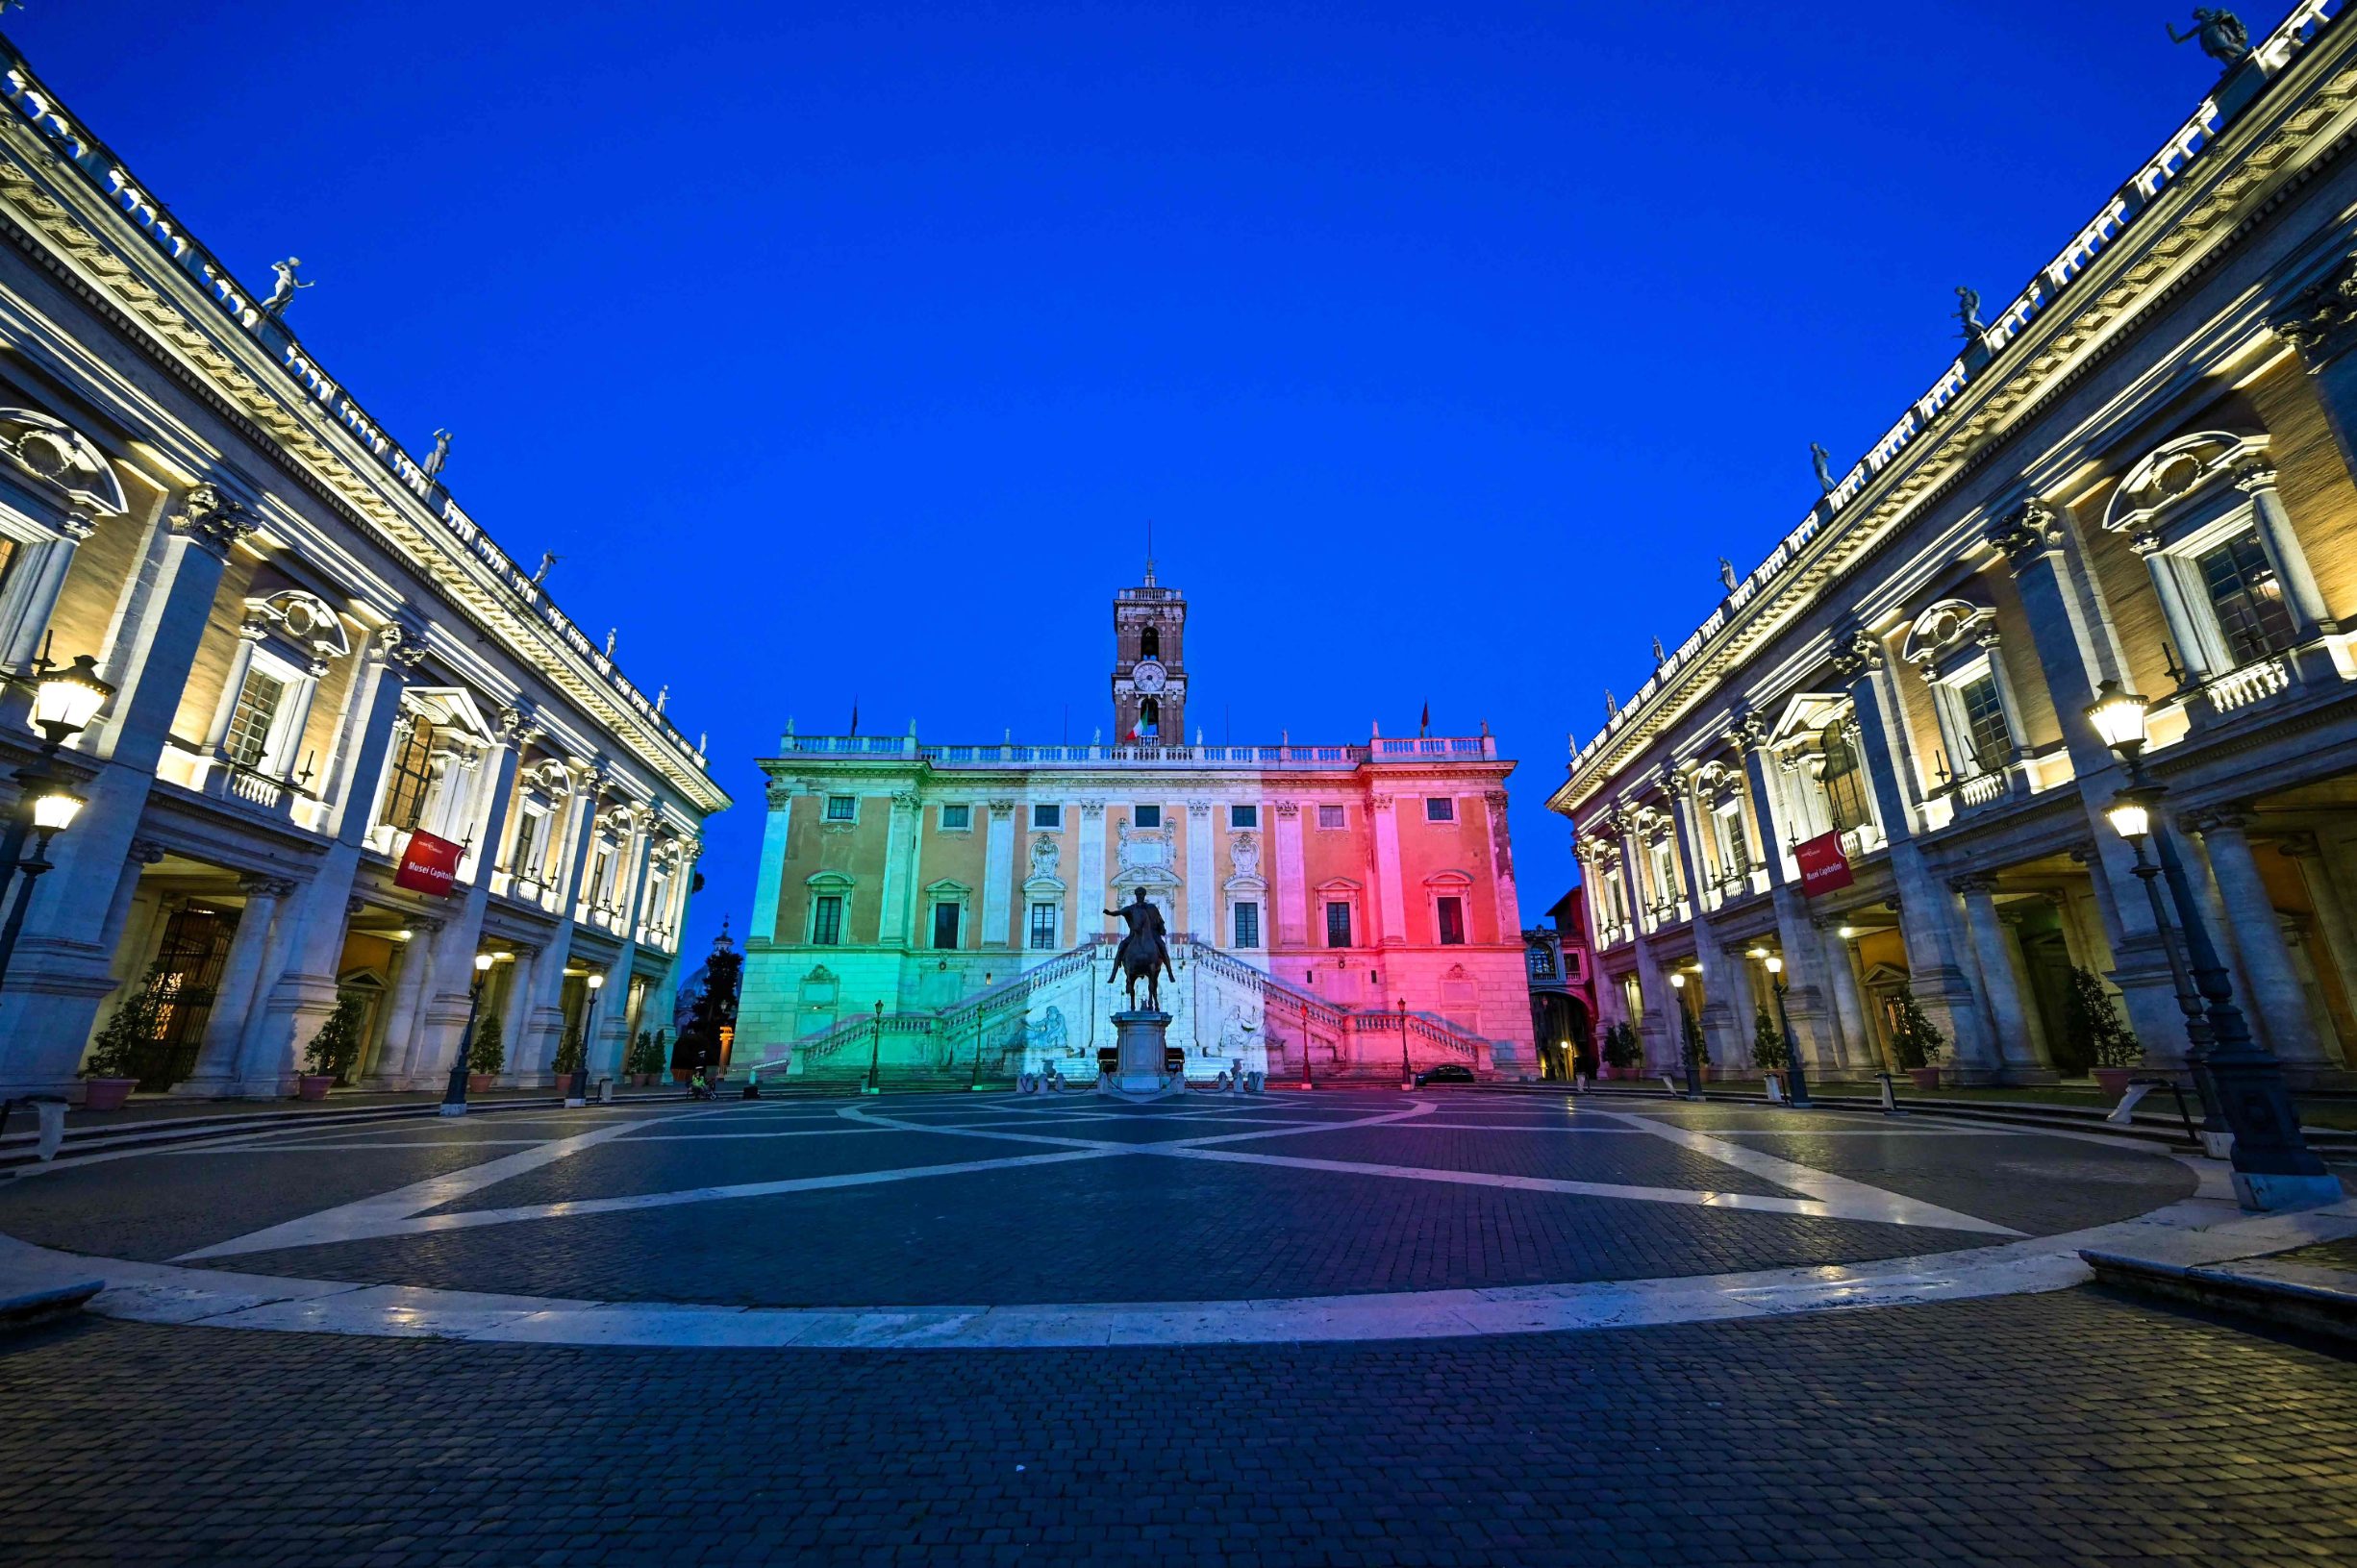 The colors of the Italian flag are projected onto the Palazzo Senatorio building on Capitoline Hill (Campidoglio) in Rome, on April 26, 2020 during the country's lockdown aimed at curbing the spread of the COVID-19 infection, caused by the novel coronavirus. (Photo by ANDREAS SOLARO / AFP)